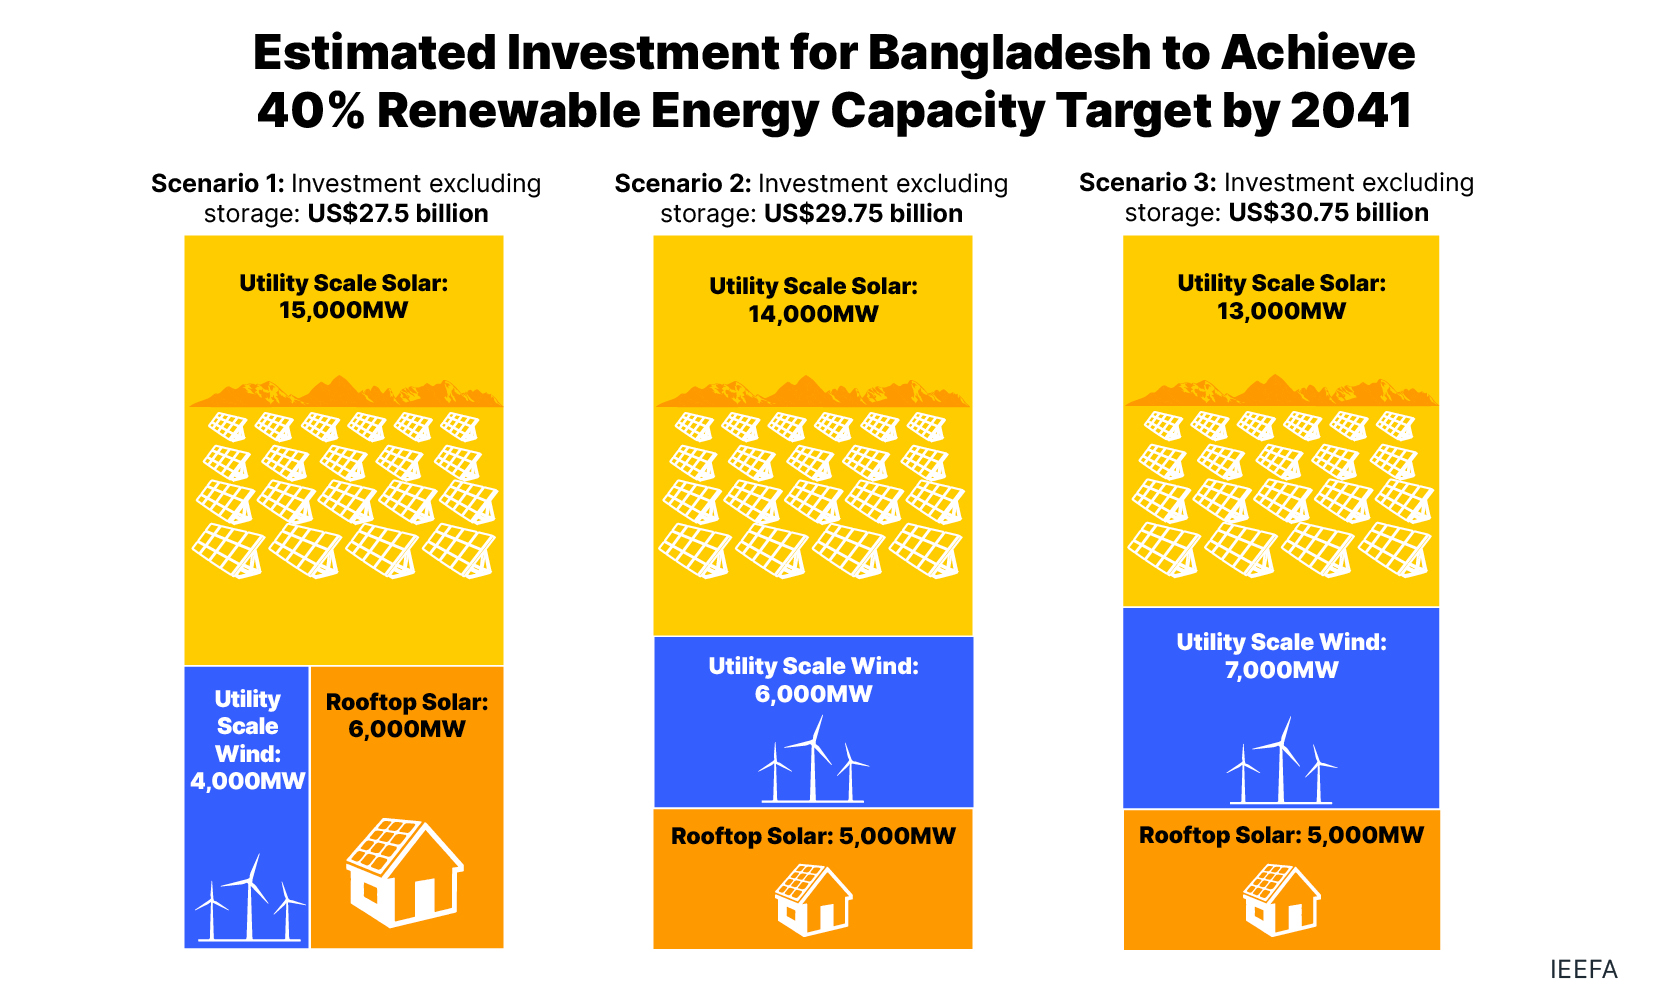 Estimated Investment for Bangladesh to Achieve 40% Renewable Energy Capacity Target by 2041